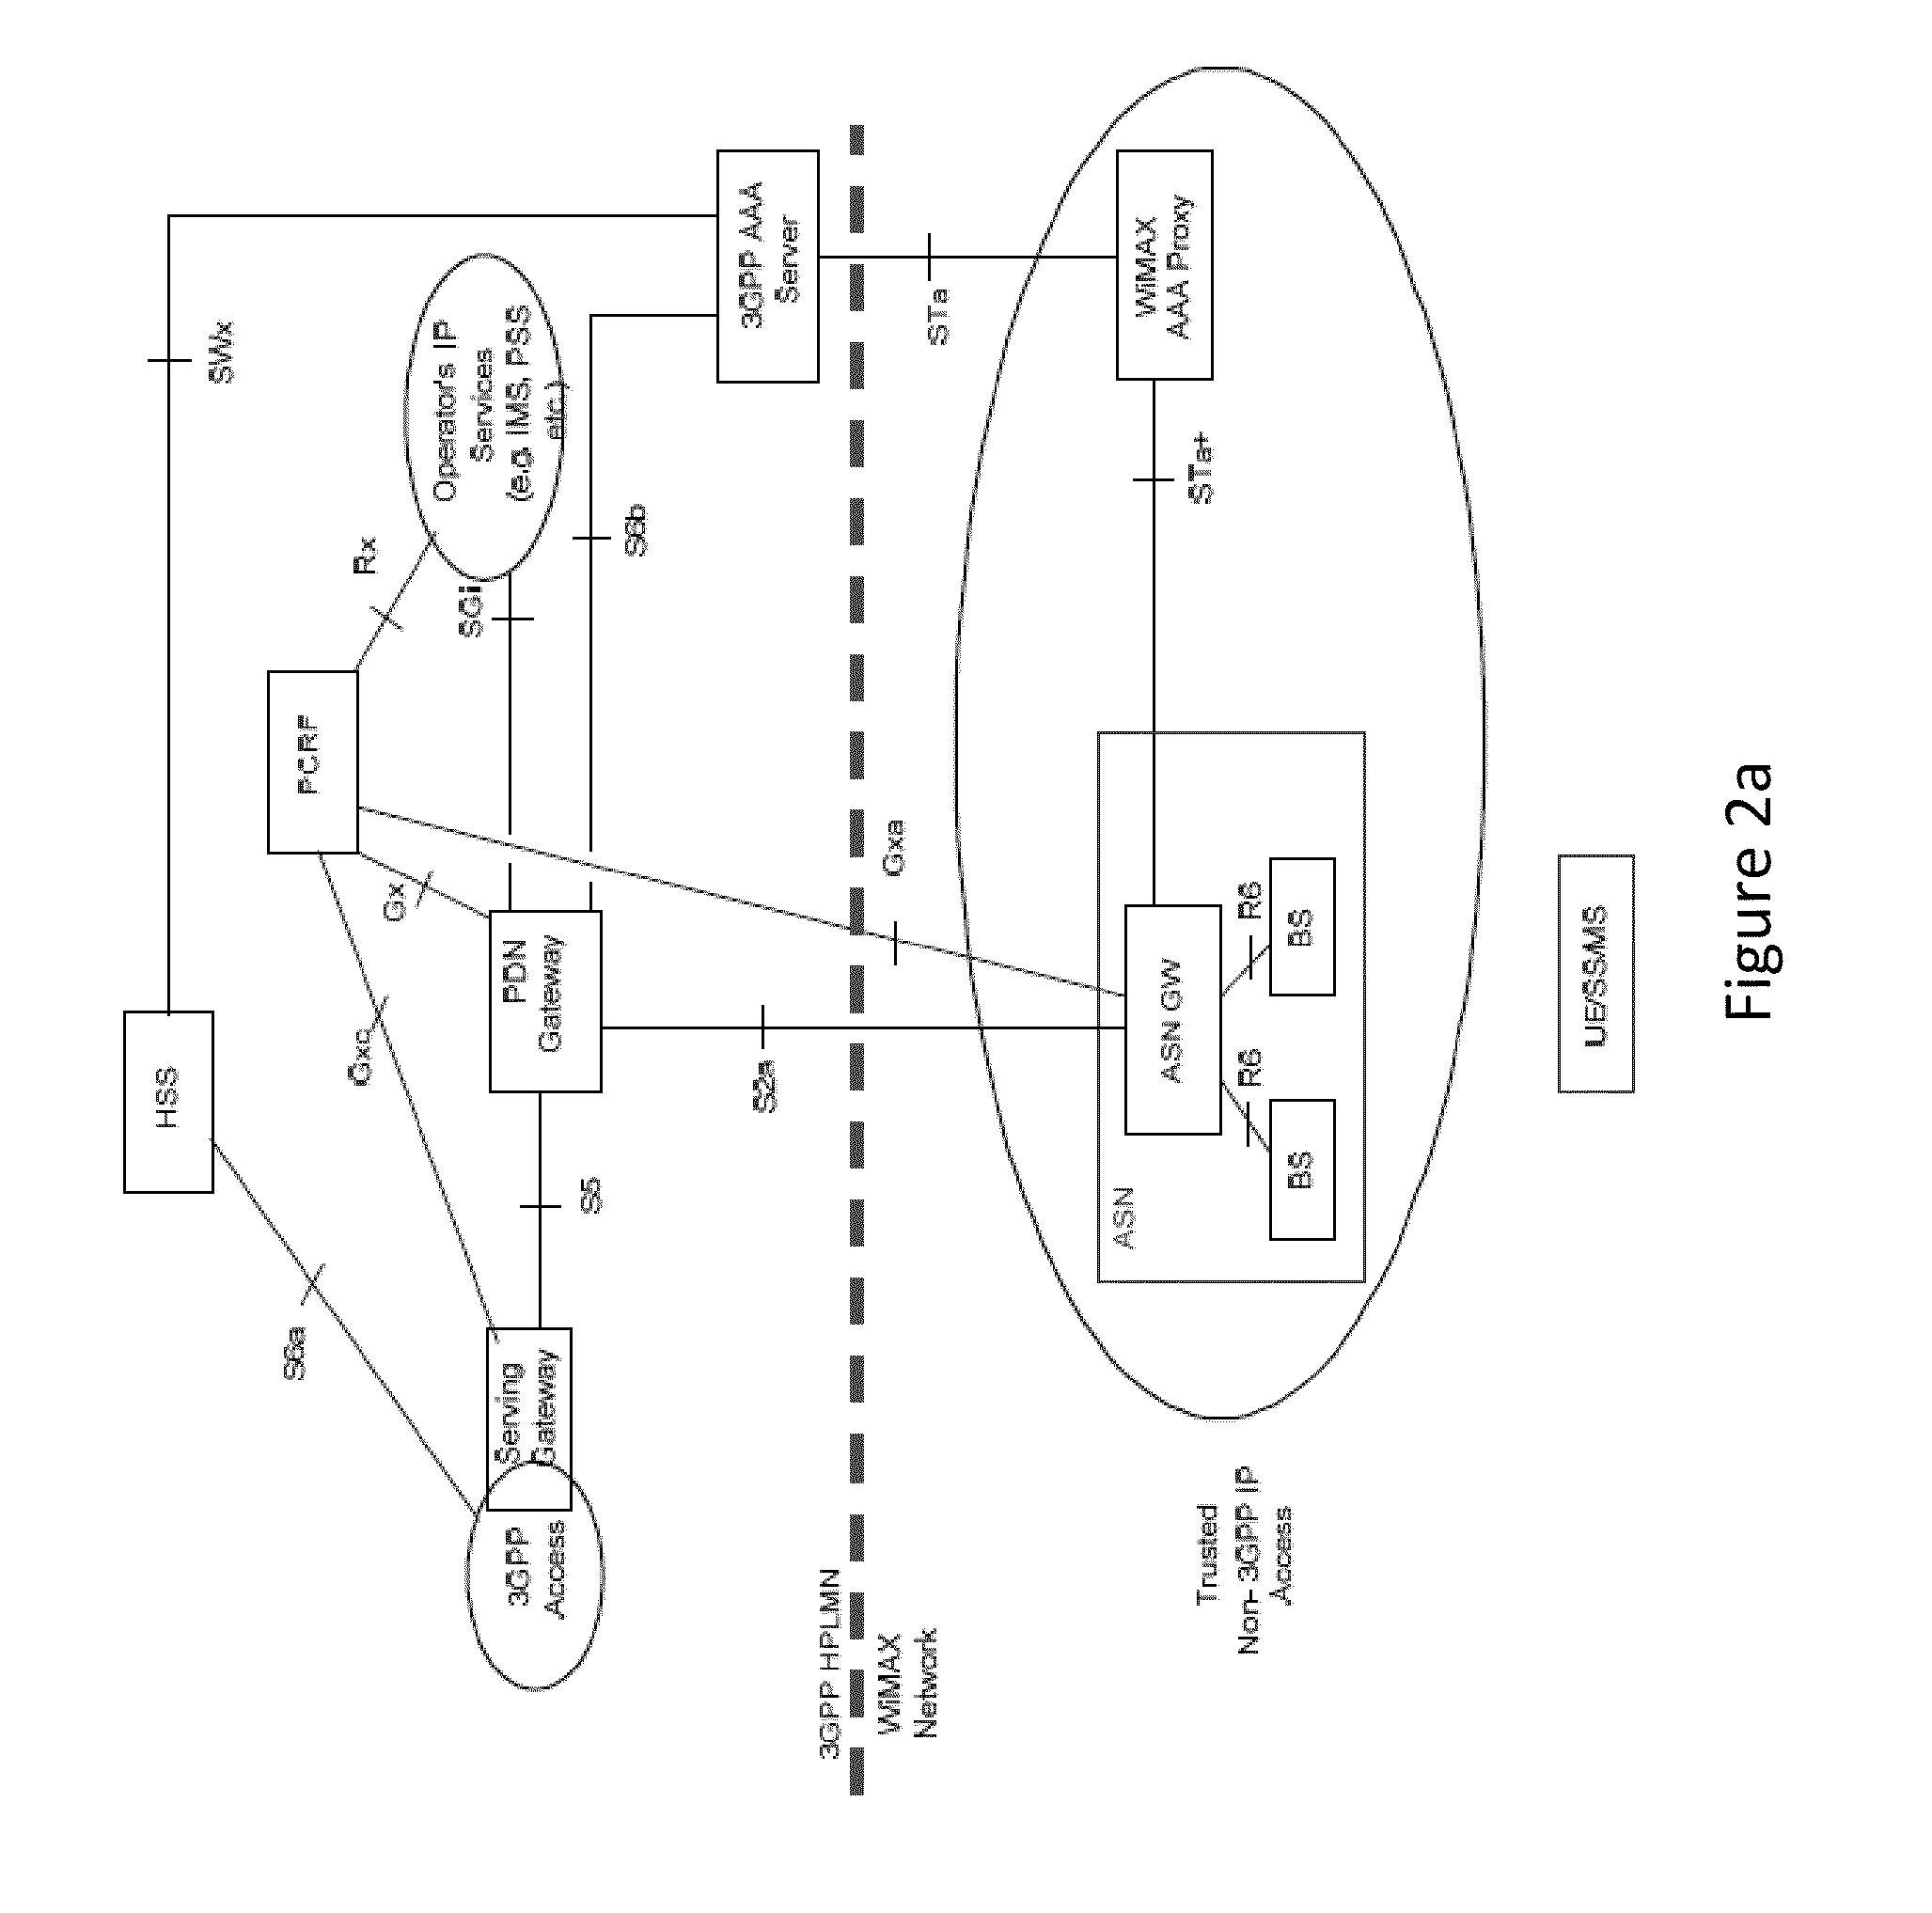 Method and System for Interworking Between Two Different Networks